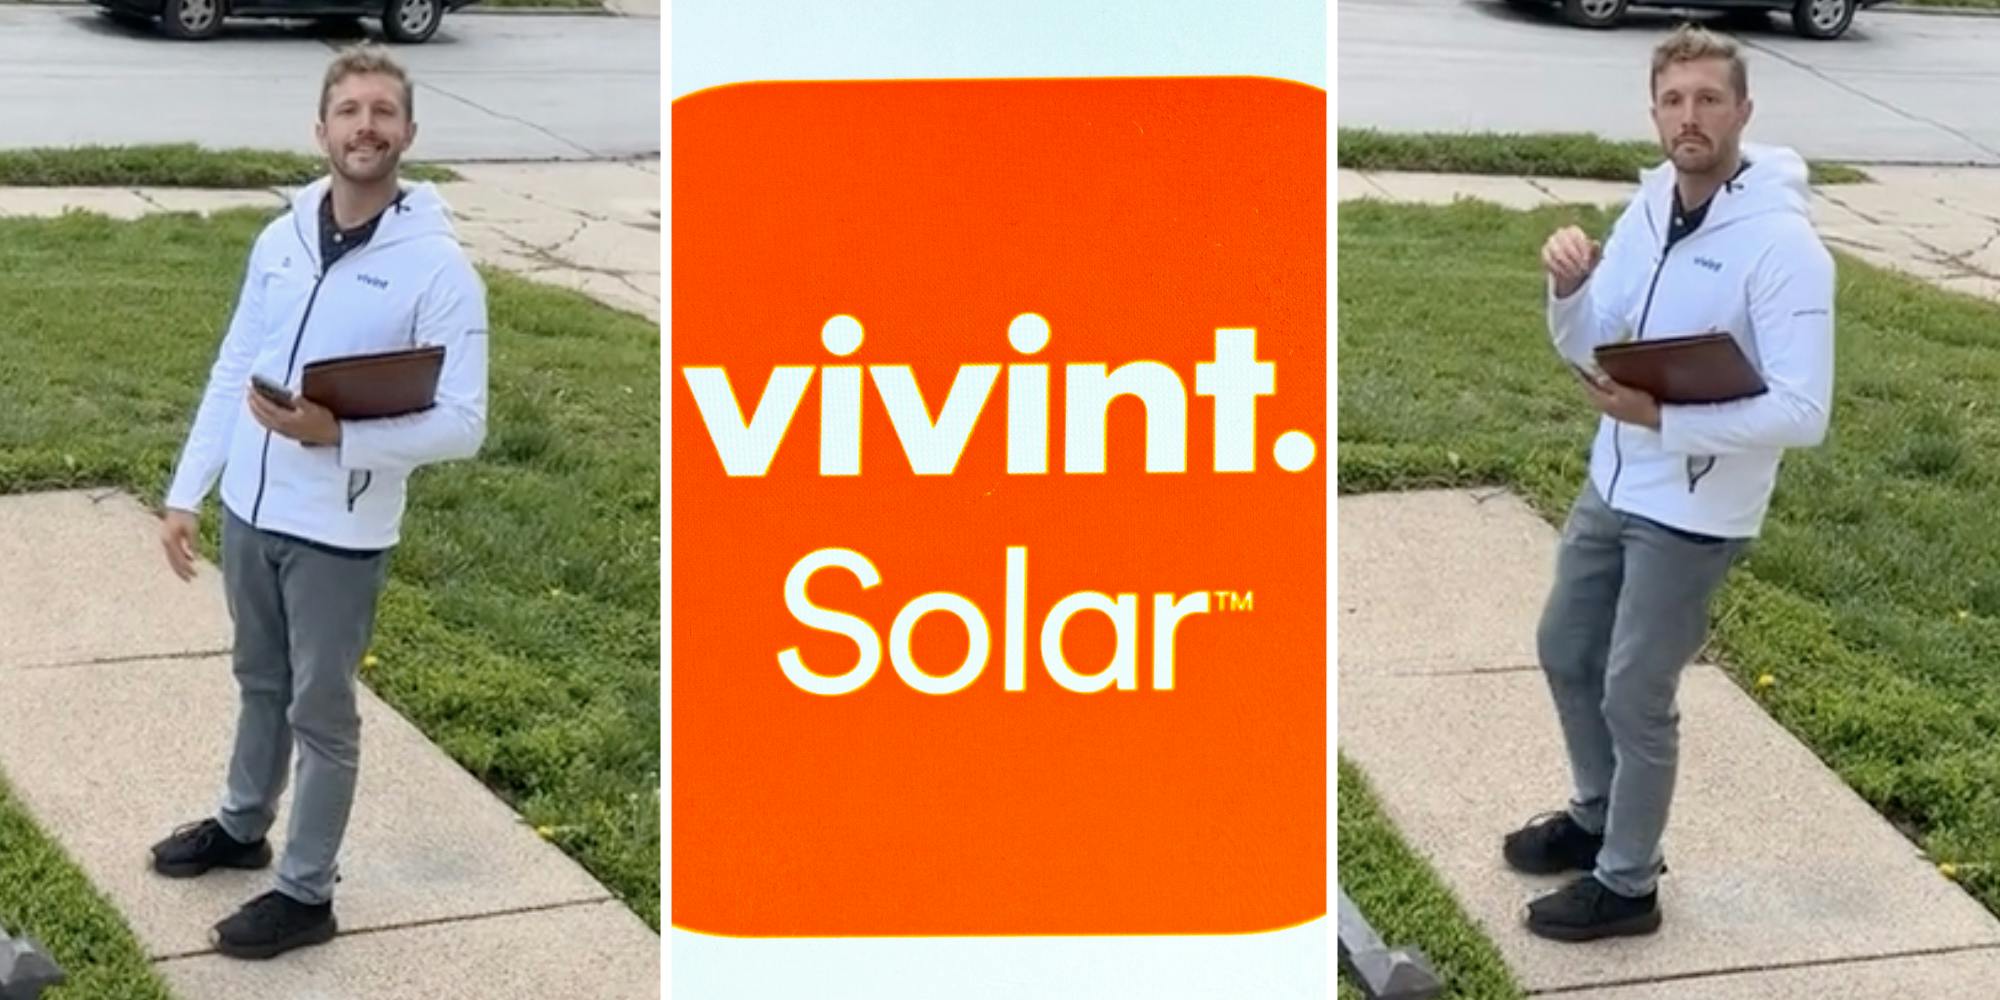 ‘Go home!’: Woman calls out Vivint salesman for coming to her door during tornado